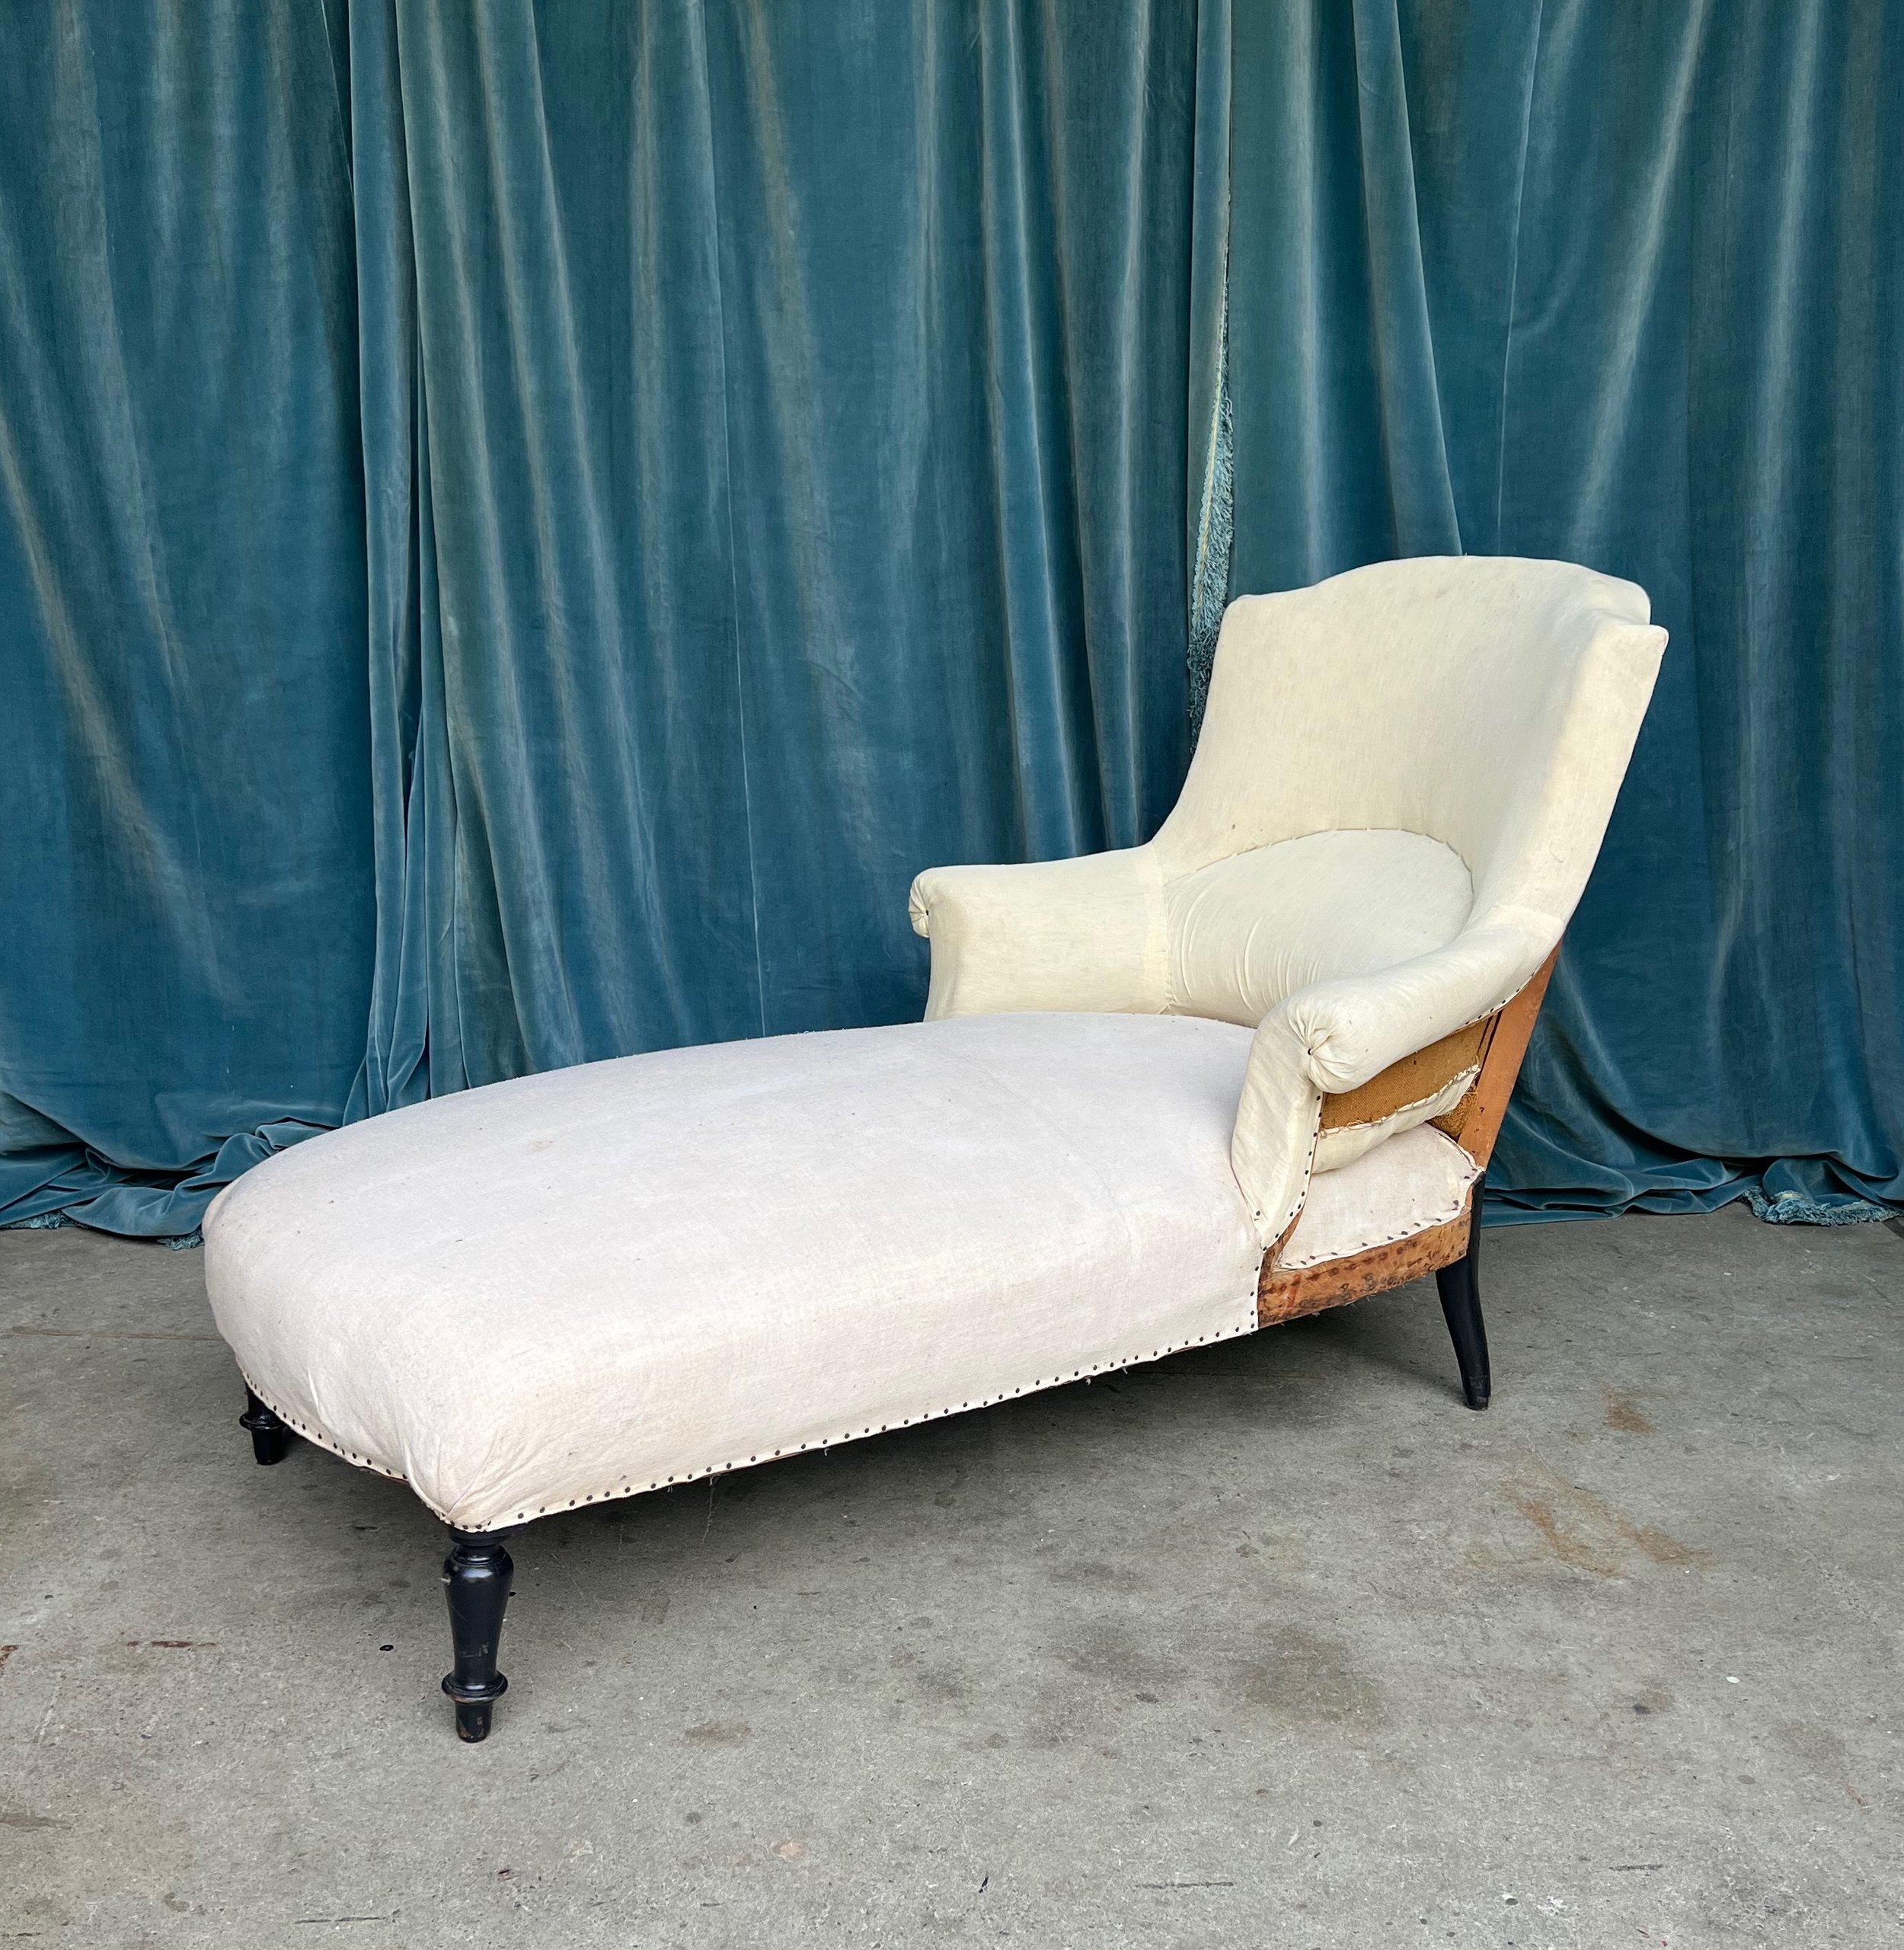 This elegant French Napoleon III chaise longue in muslin is classic and timeless. Its sophisticated 